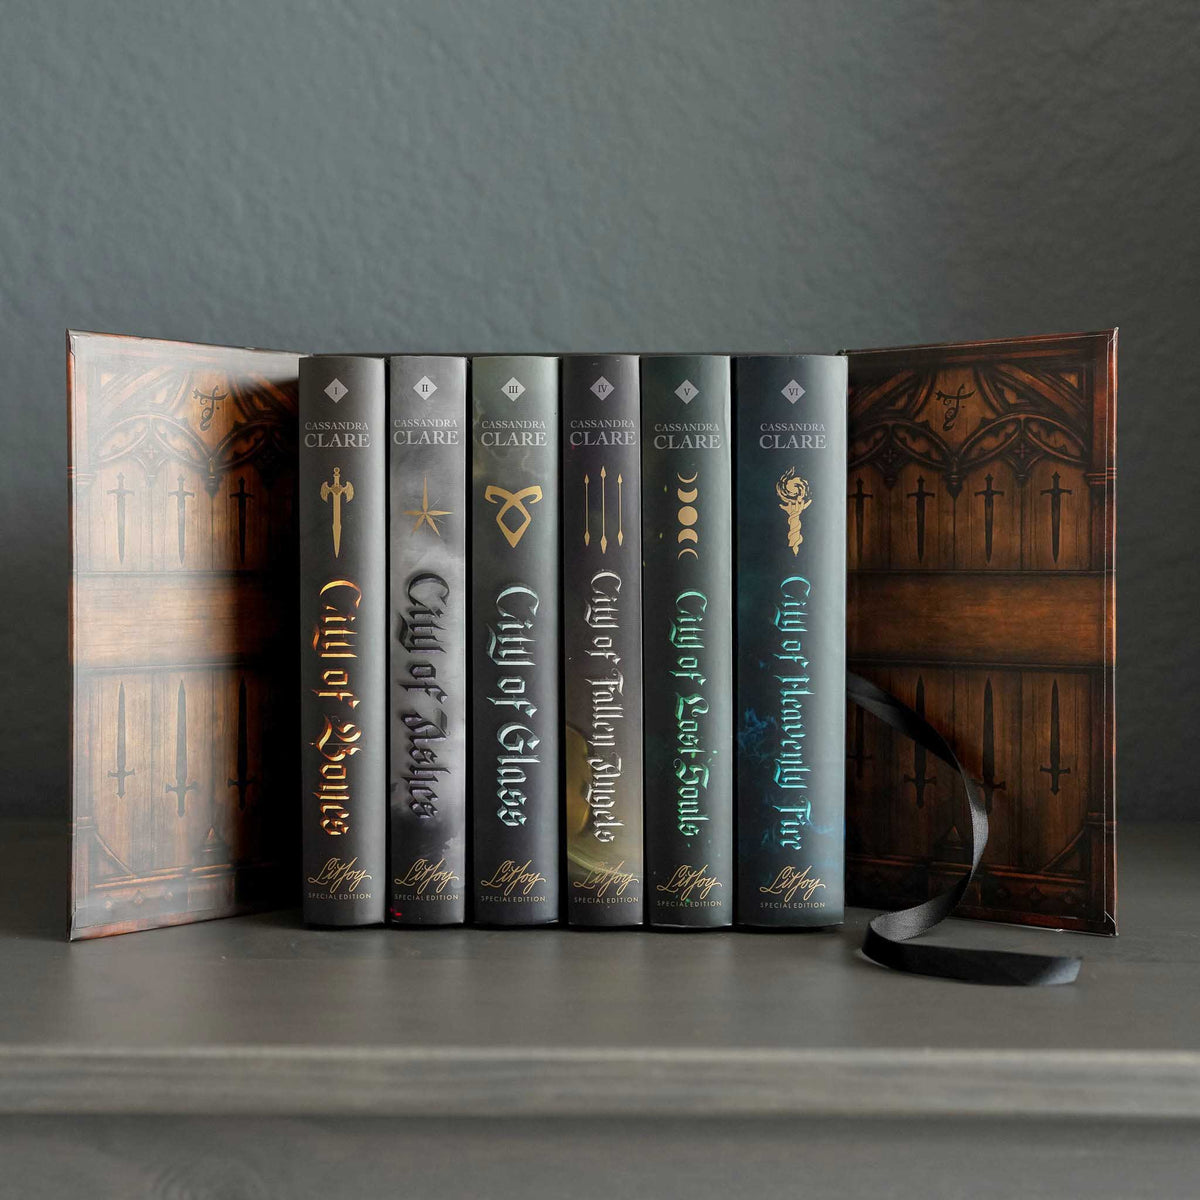 Special Edition The Mortal Instruments Box Set featuring all six books in the series and a specially designed slipcase